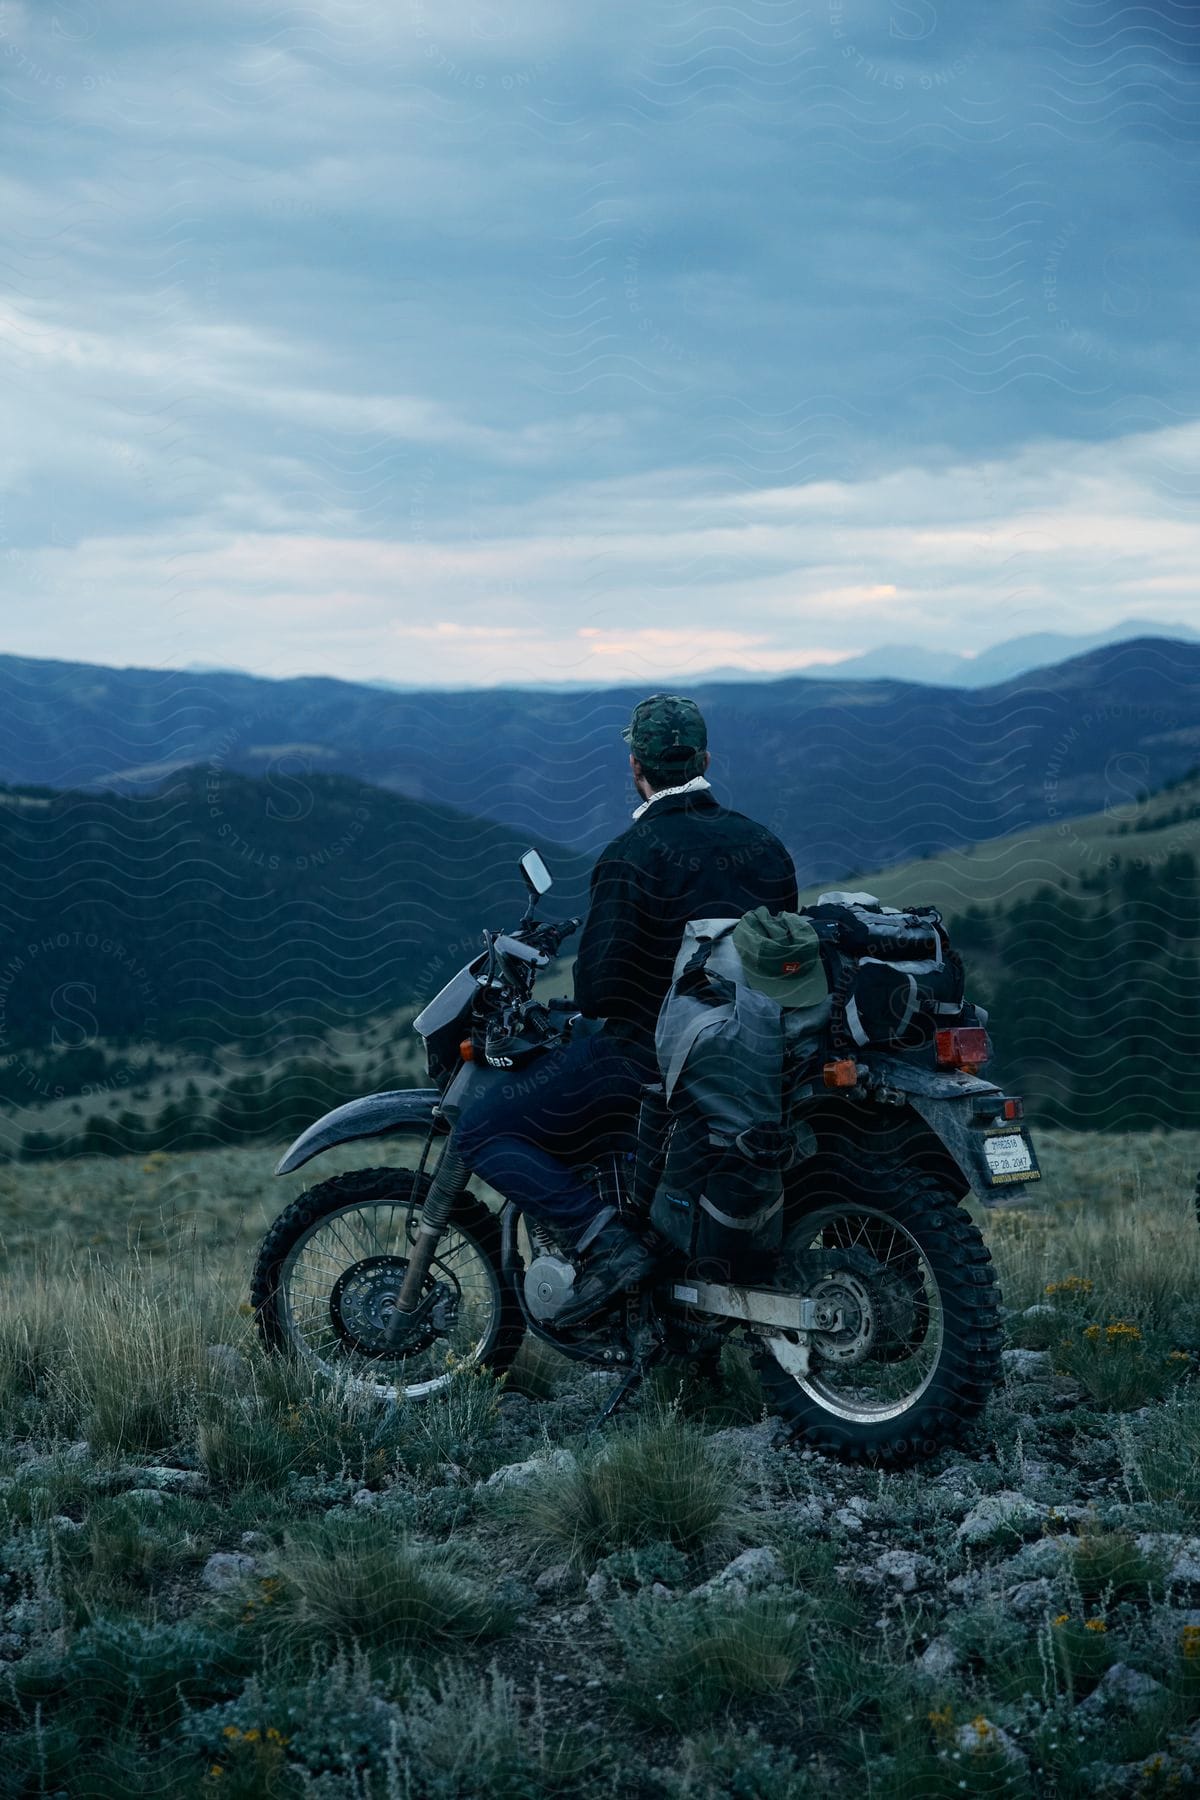 A man sits on his motorcycle in a field looking at mountains under a cloudy sky